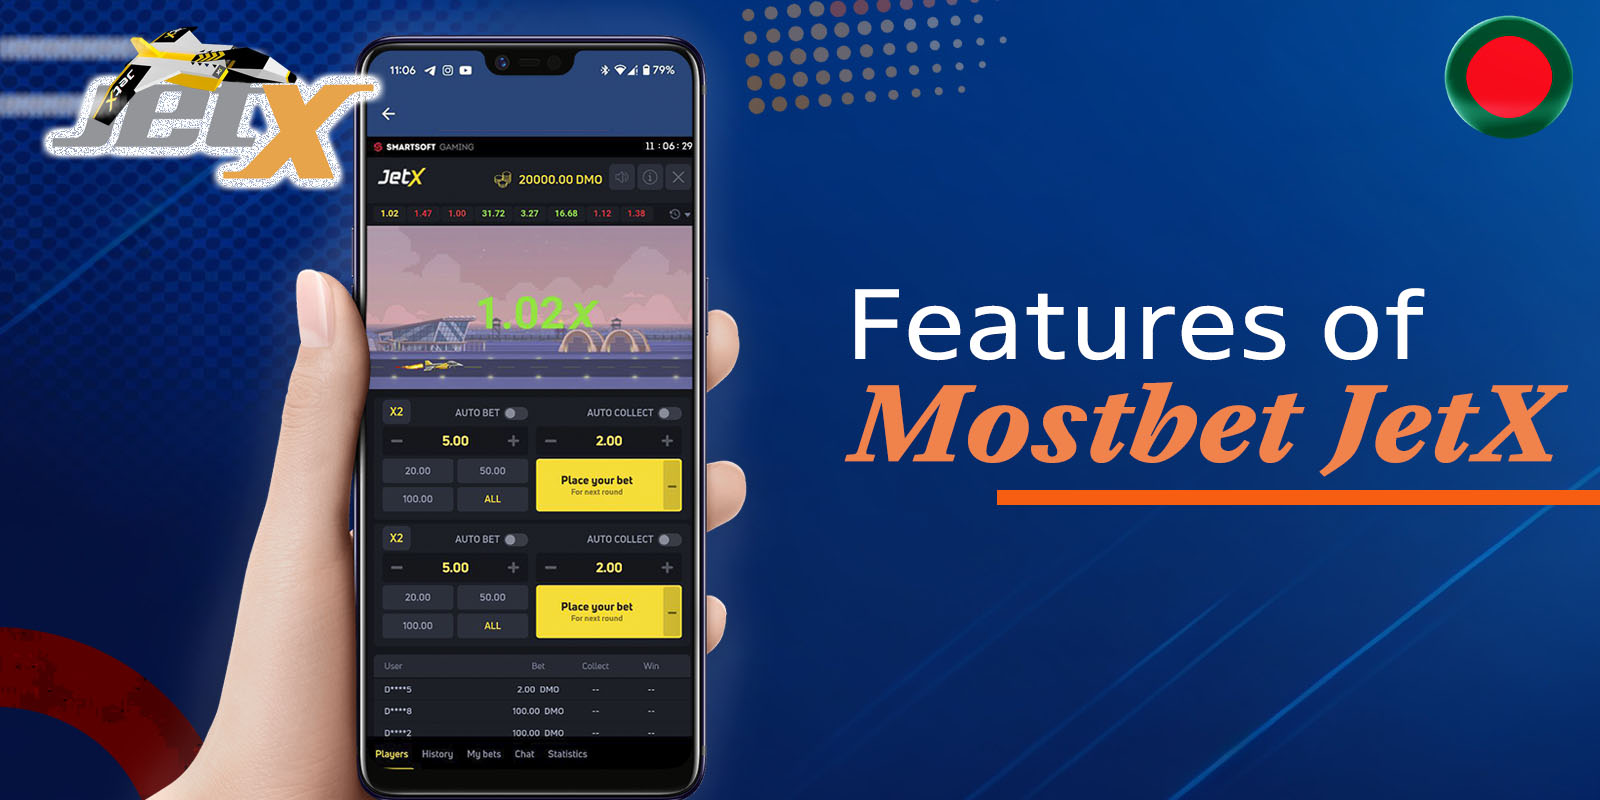 Features of Mostbet Jet X